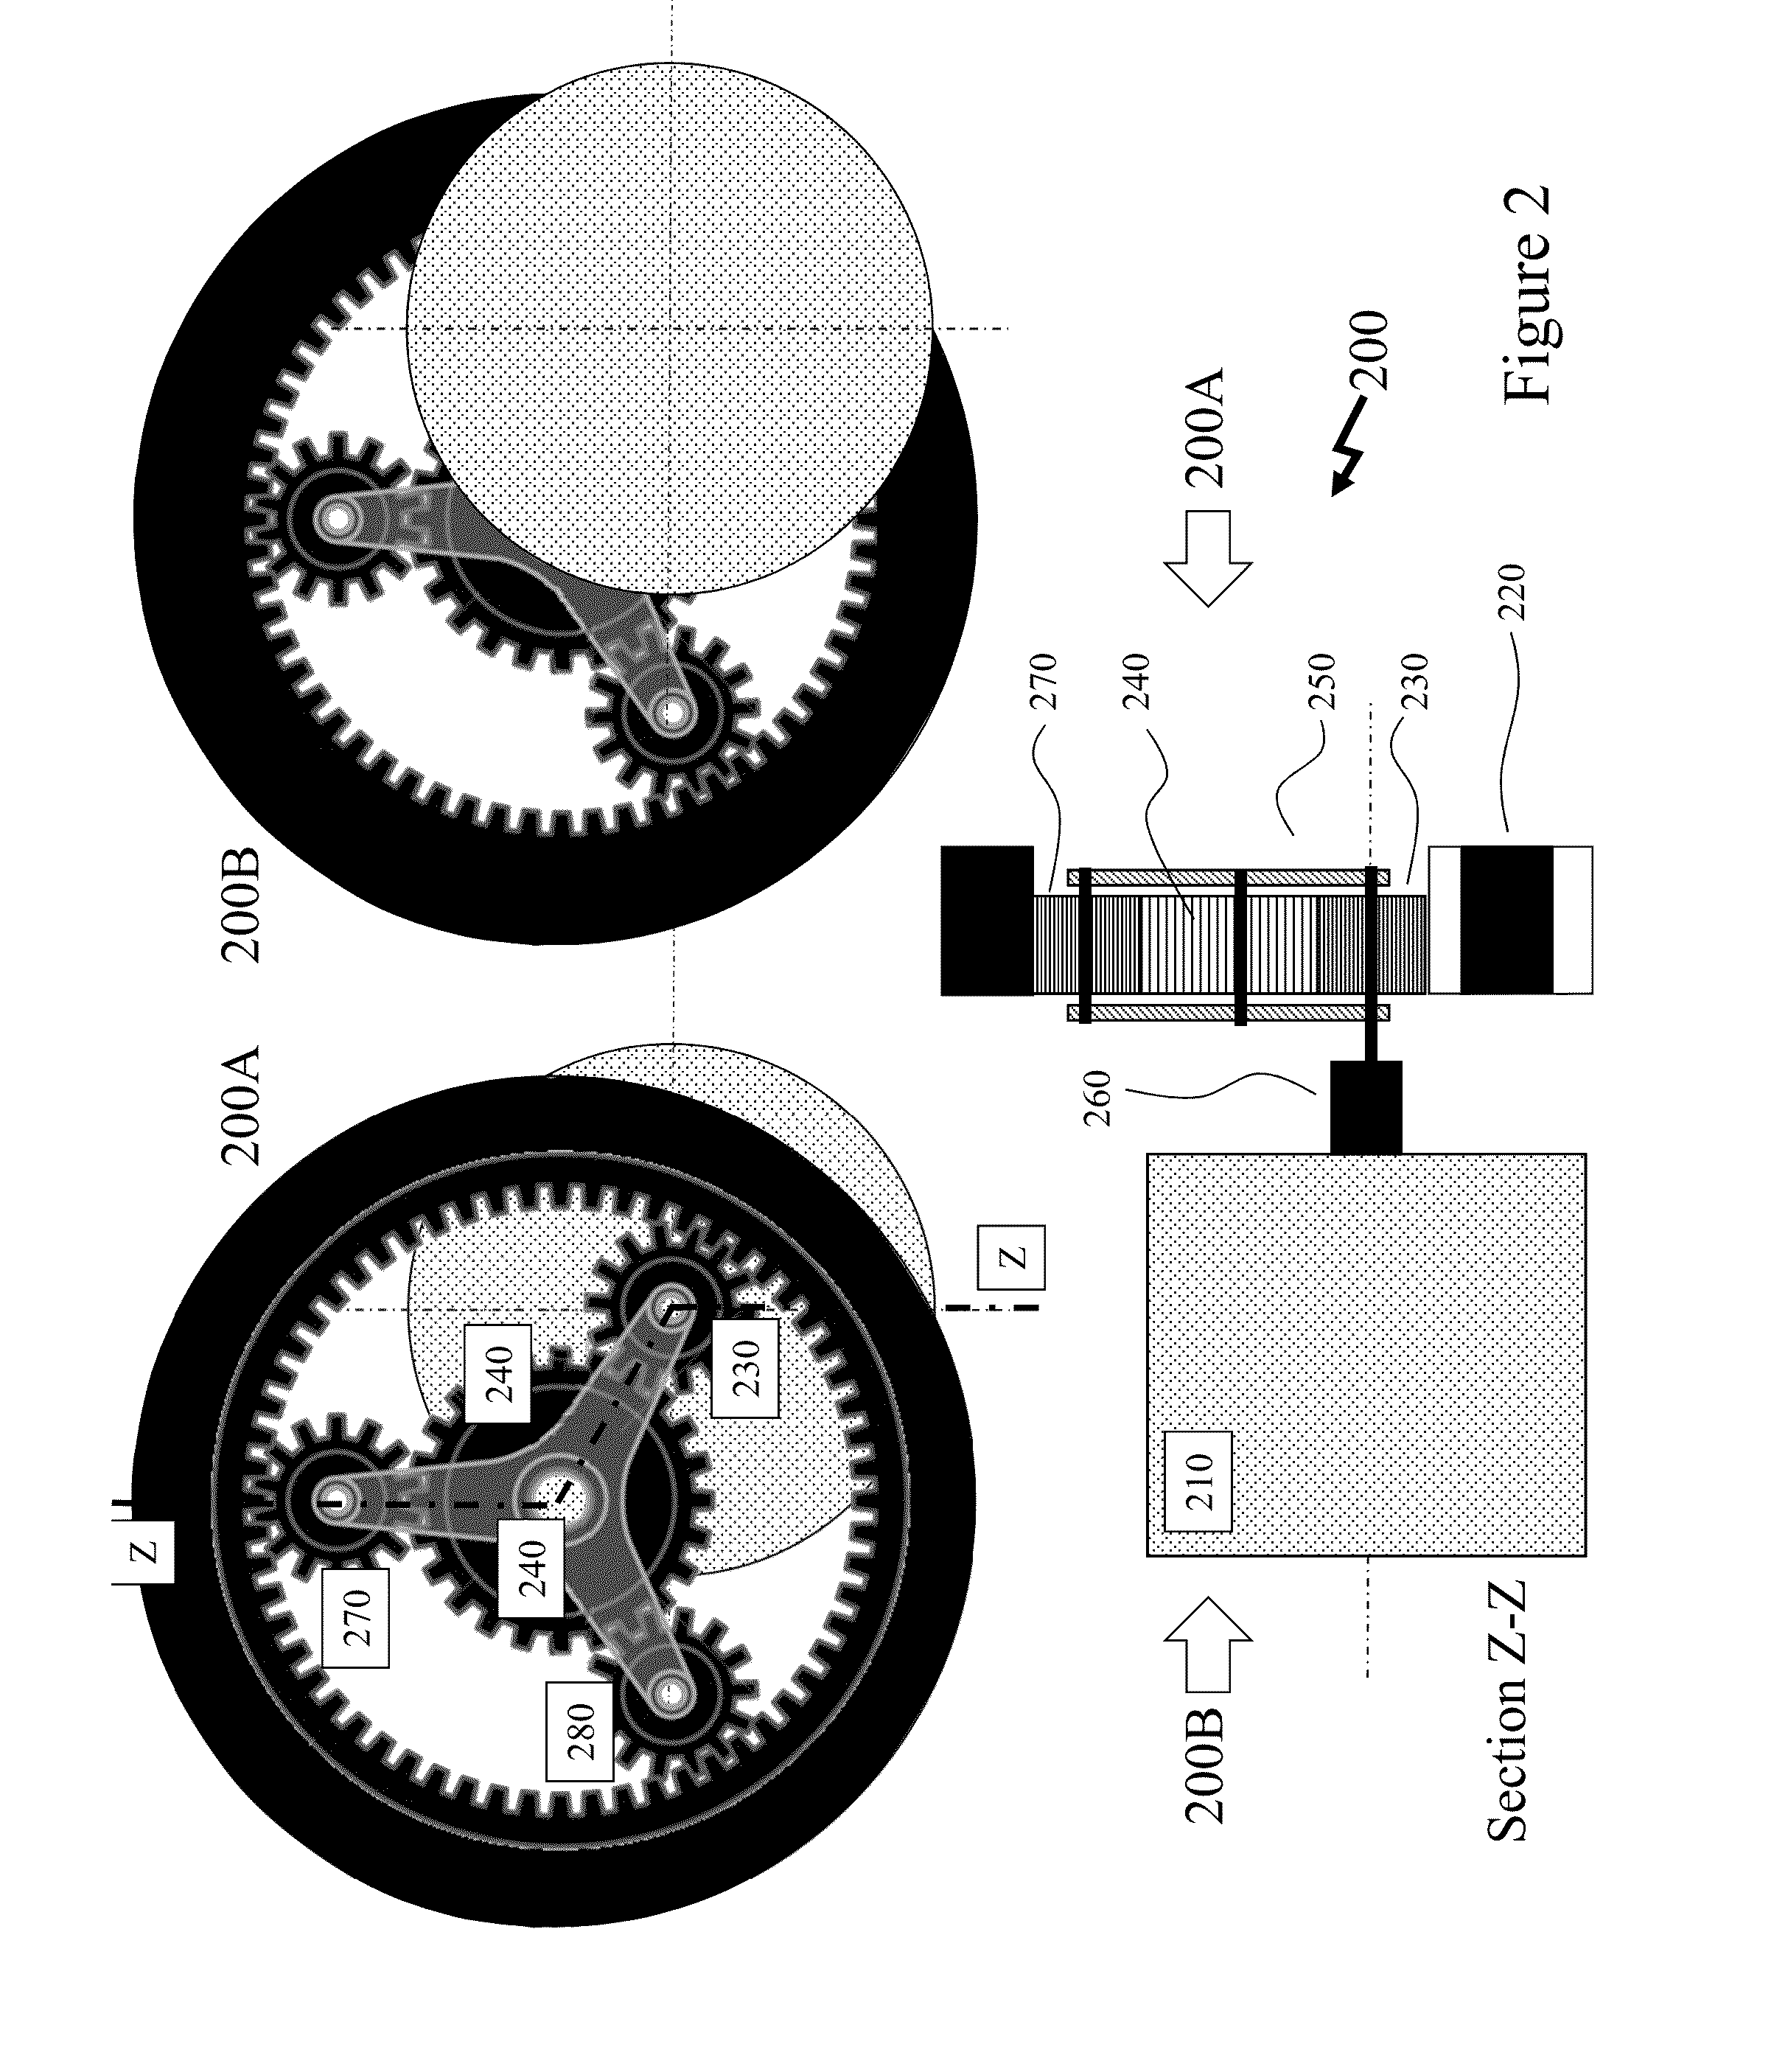 Methods and devices relating to vibratory impact adult devices